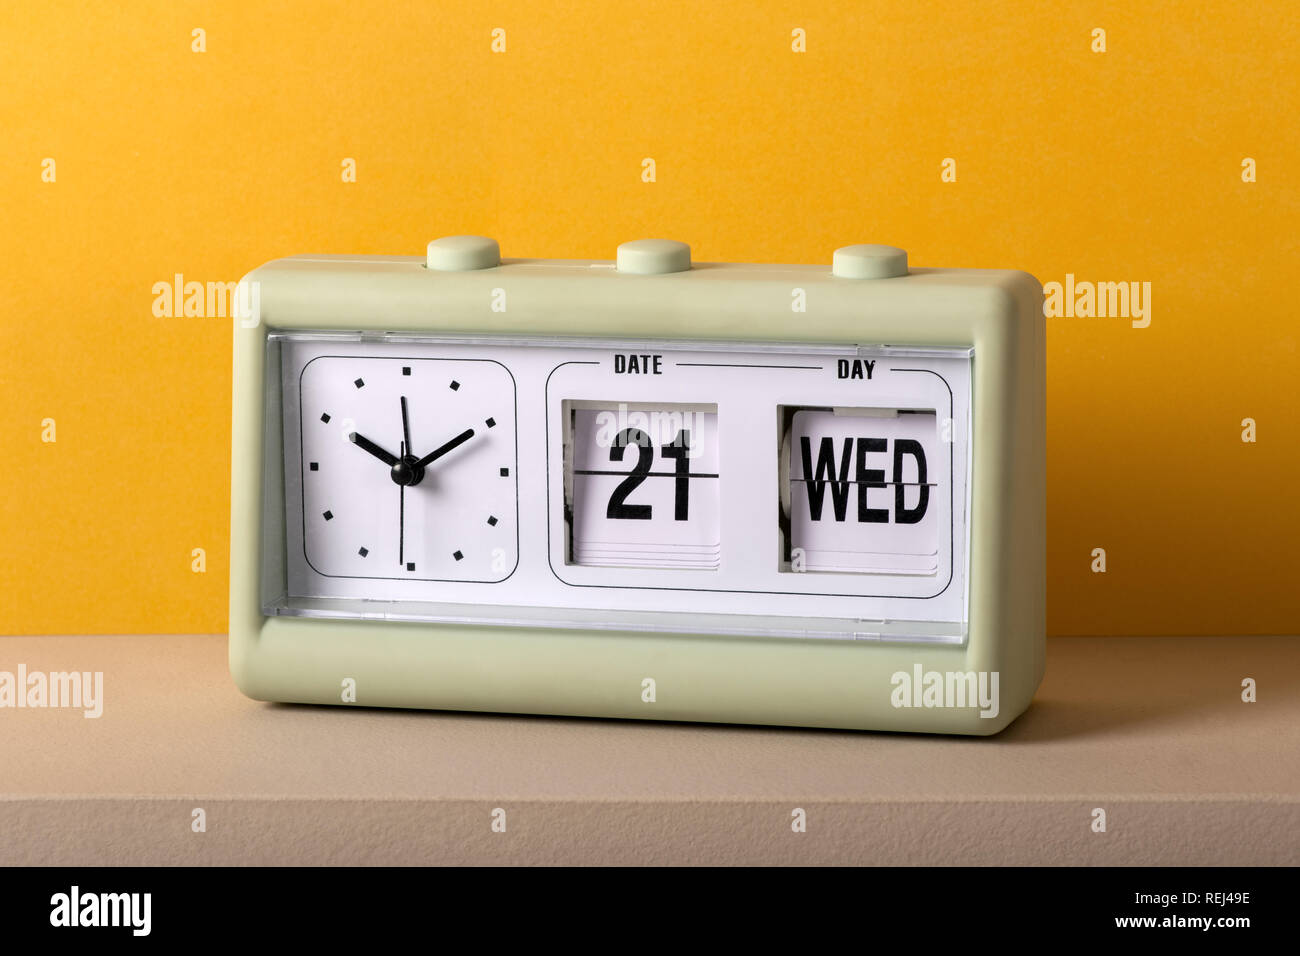 Vintage plastic tabletop clock with date, including the day in large numbers, and the time on a white dial without numerals against a colorful yellow  Stock Photo